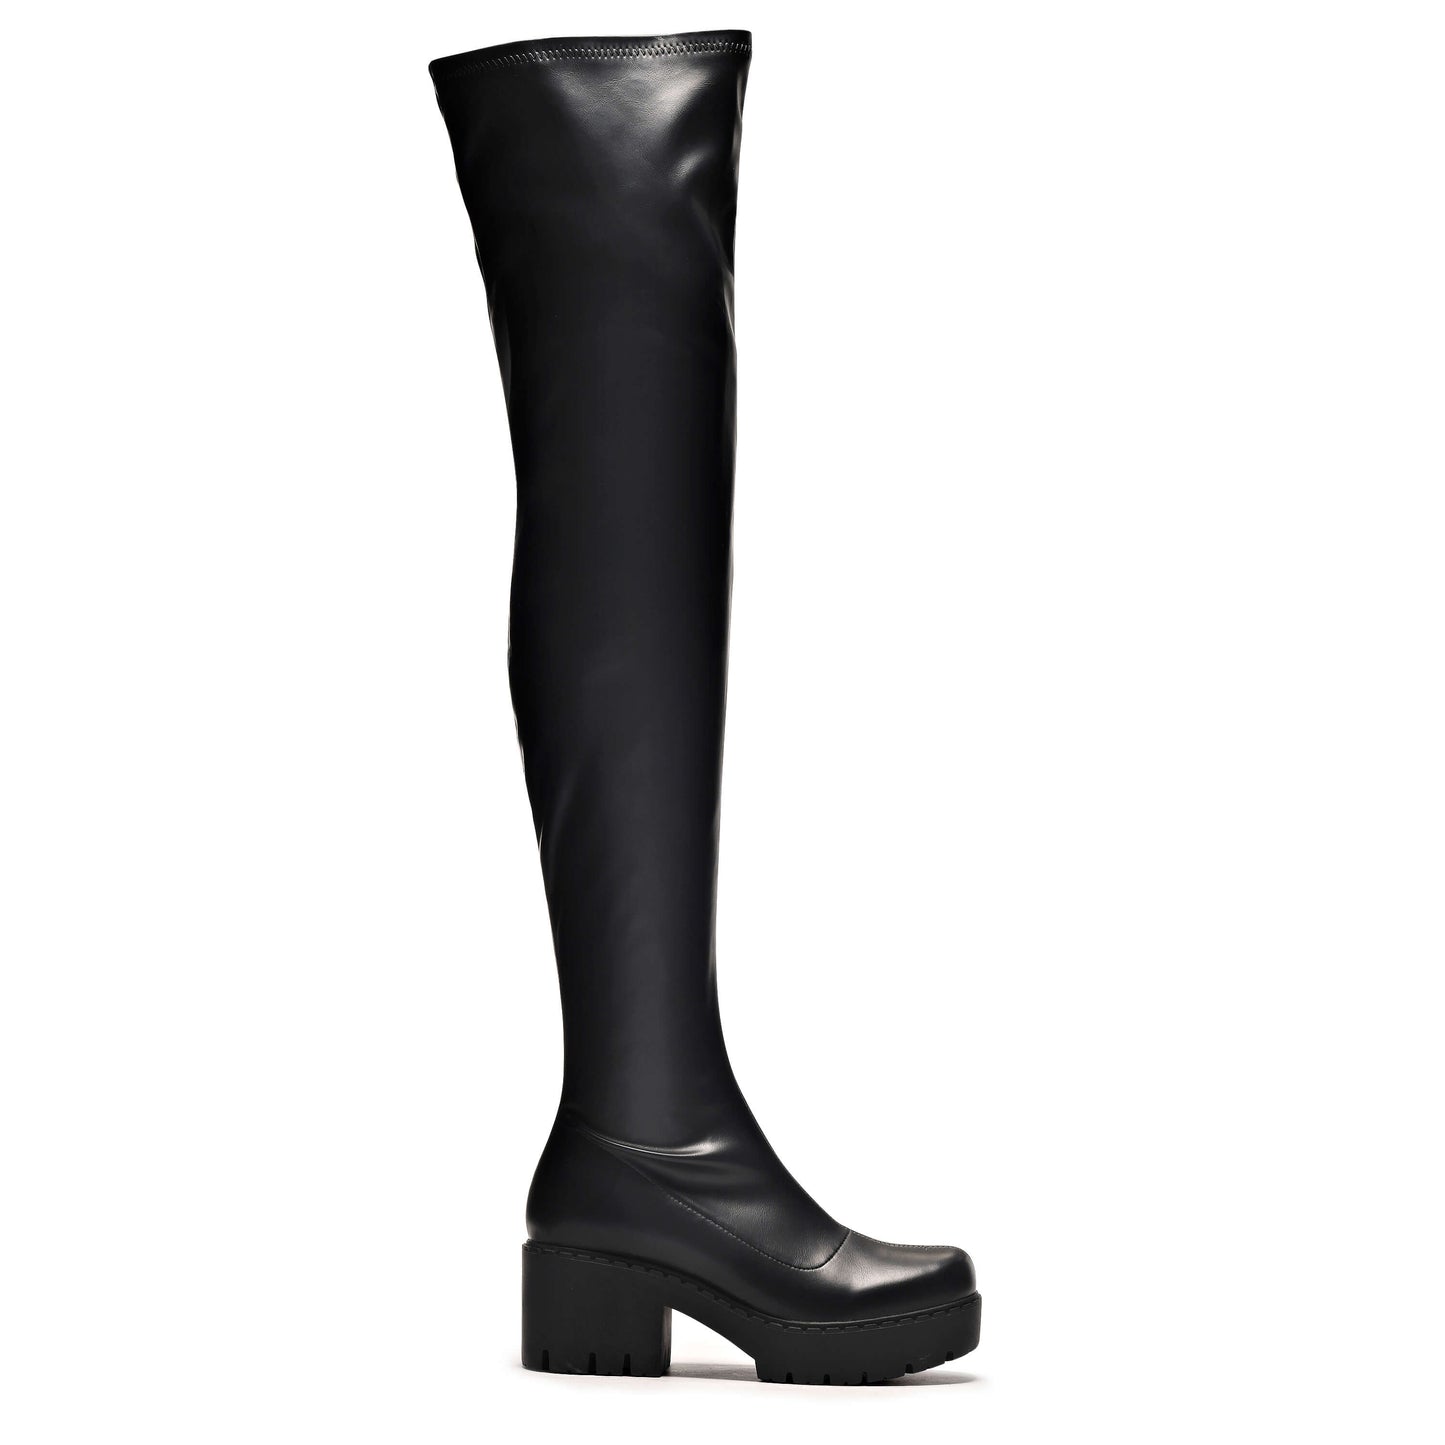 The Harmony Plus Size Thigh High Boots - Long Boots - KOI Footwear - Black - Side View